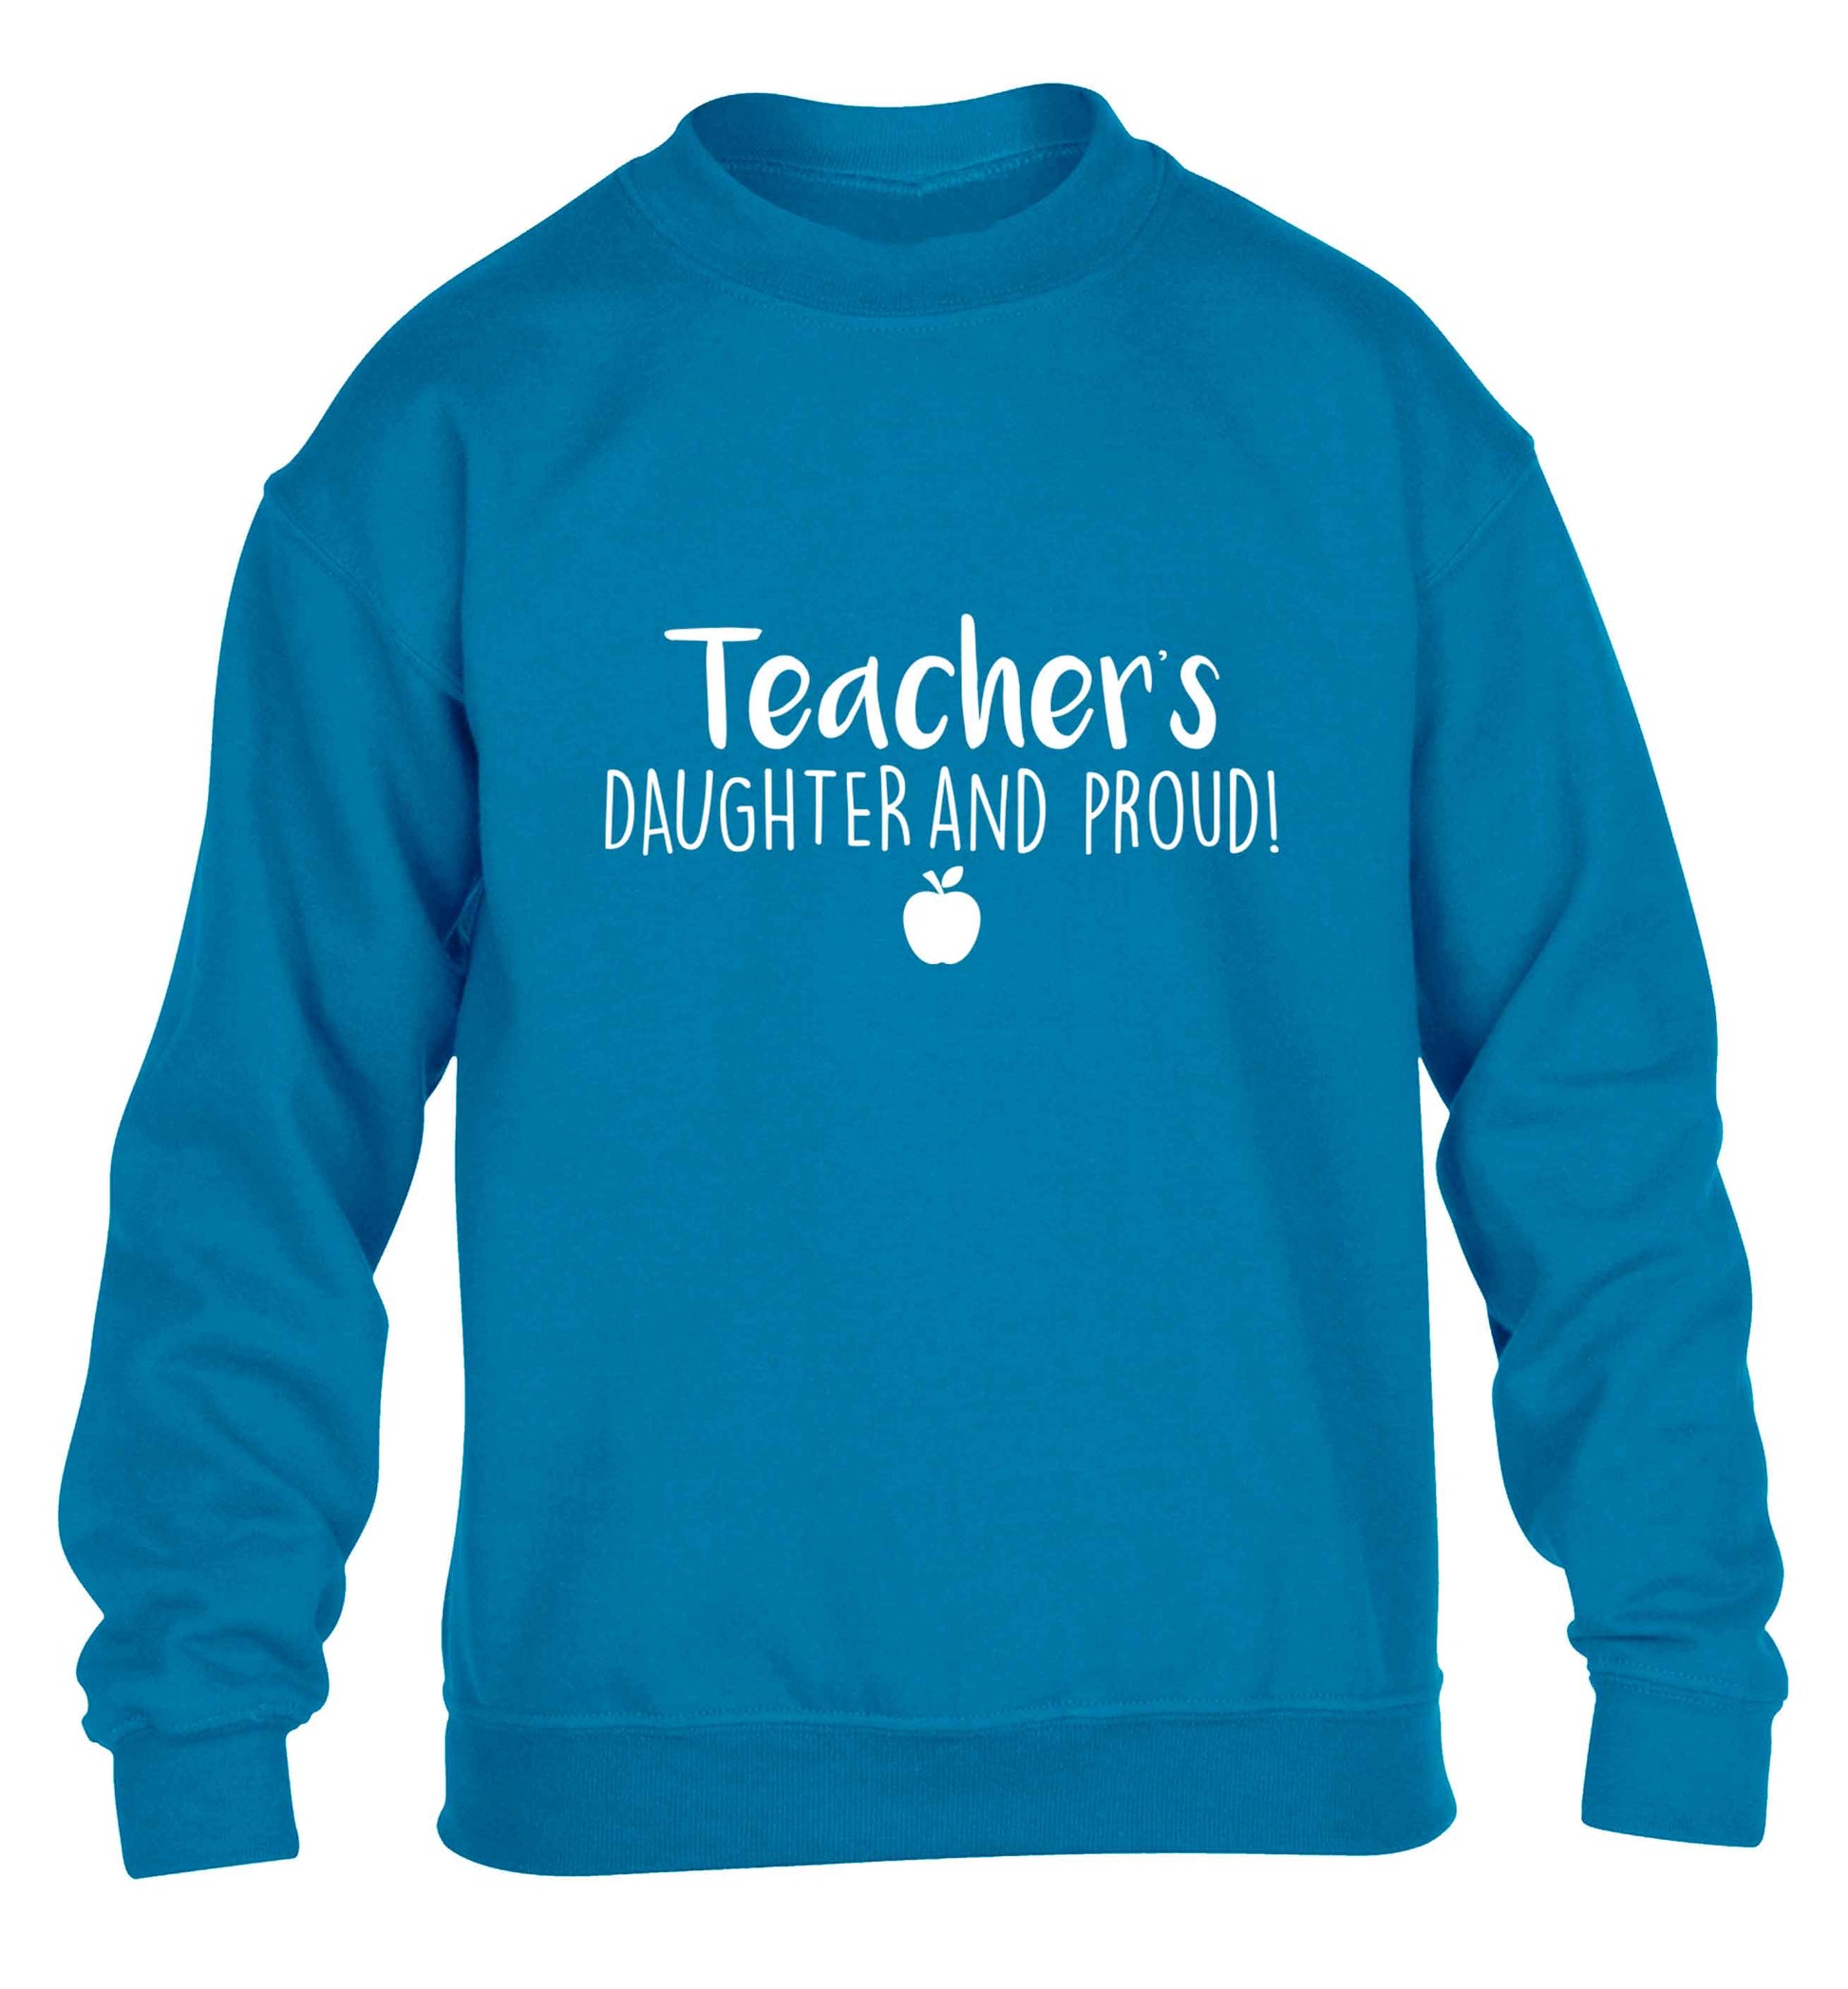 Teachers daughter and proud children's blue sweater 12-13 Years